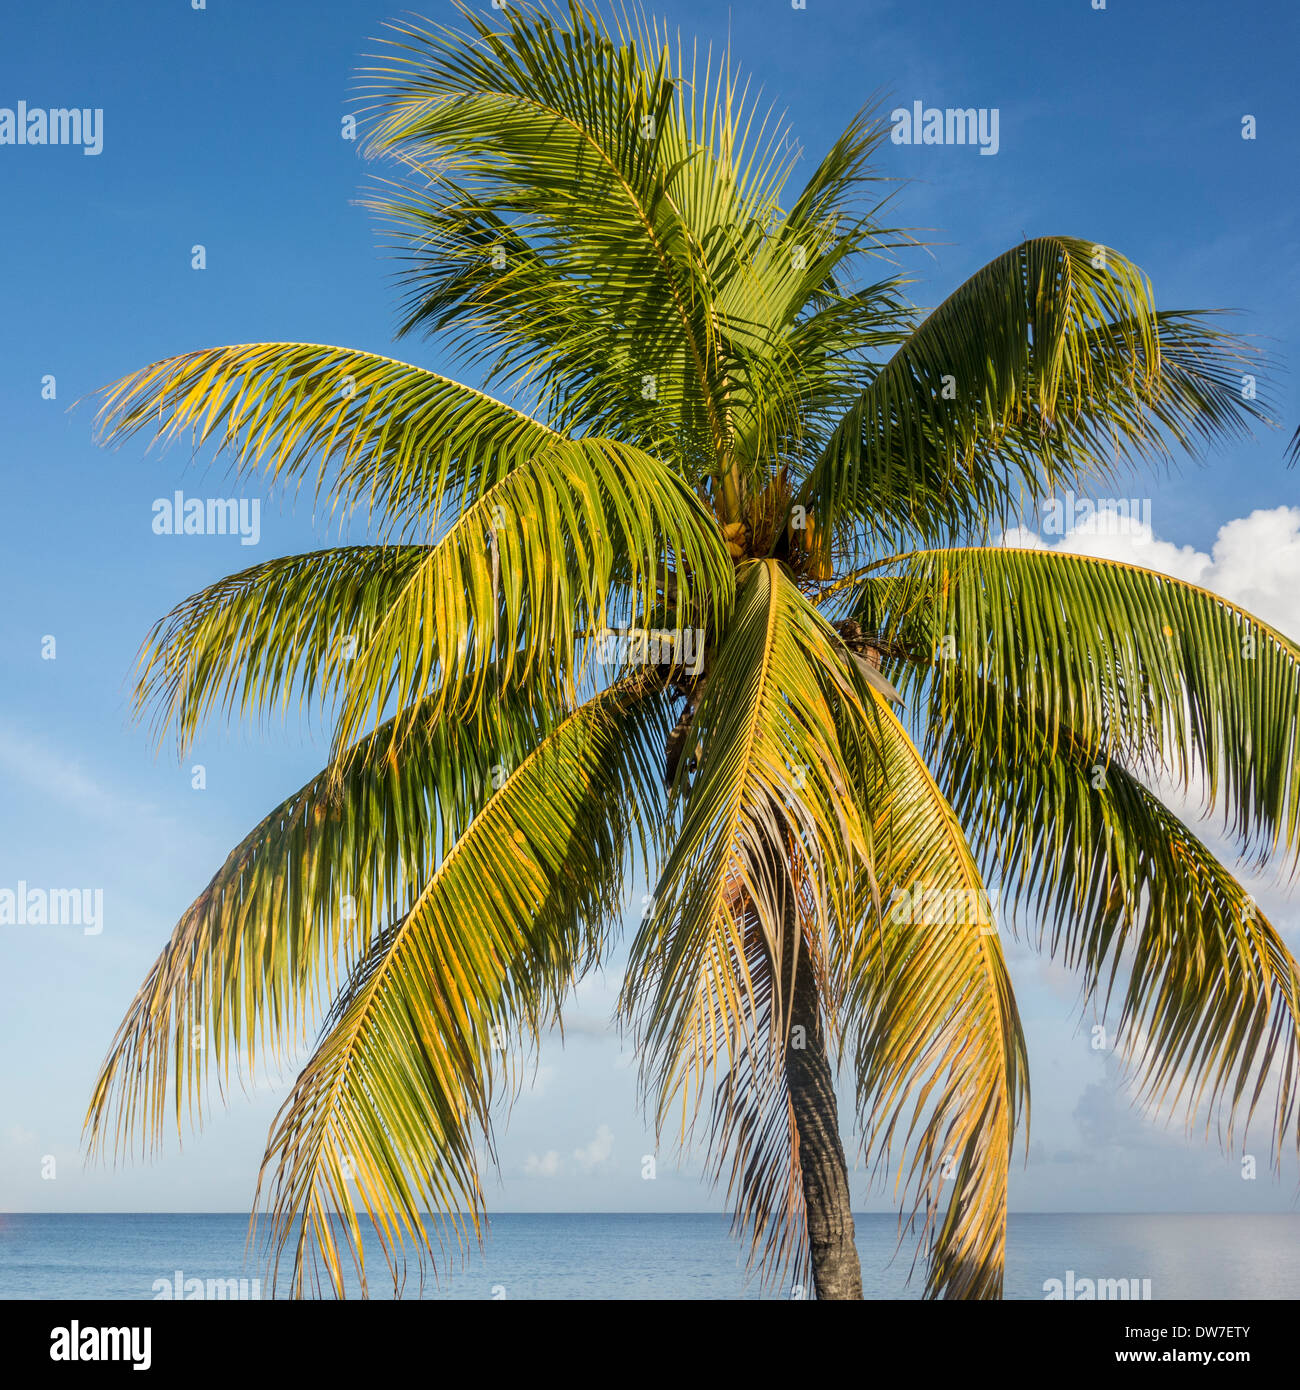 Closeup of the top of a Coconut palm tree, Cocos nucifera, with fruit against a blue sky on St. Croix, U.S. Virgin Islands. Stock Photo